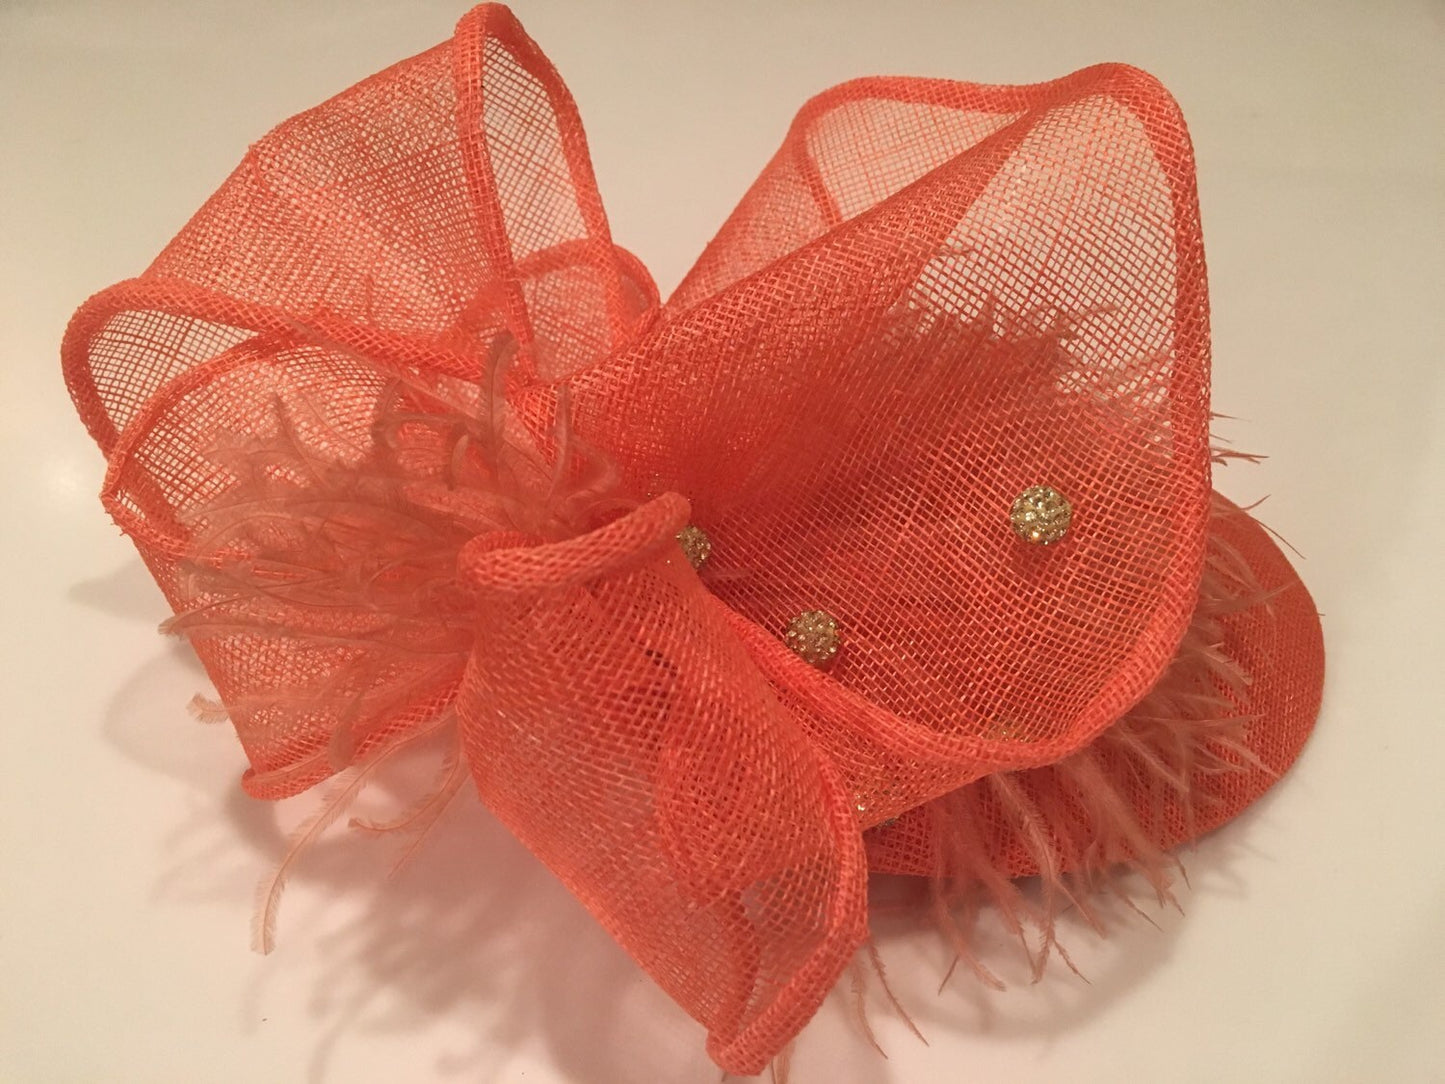 Custom Hat - SELECT A COLOR- Orange sinamay Fascinator with Ostrich Feathers and Round Rhinestone beads